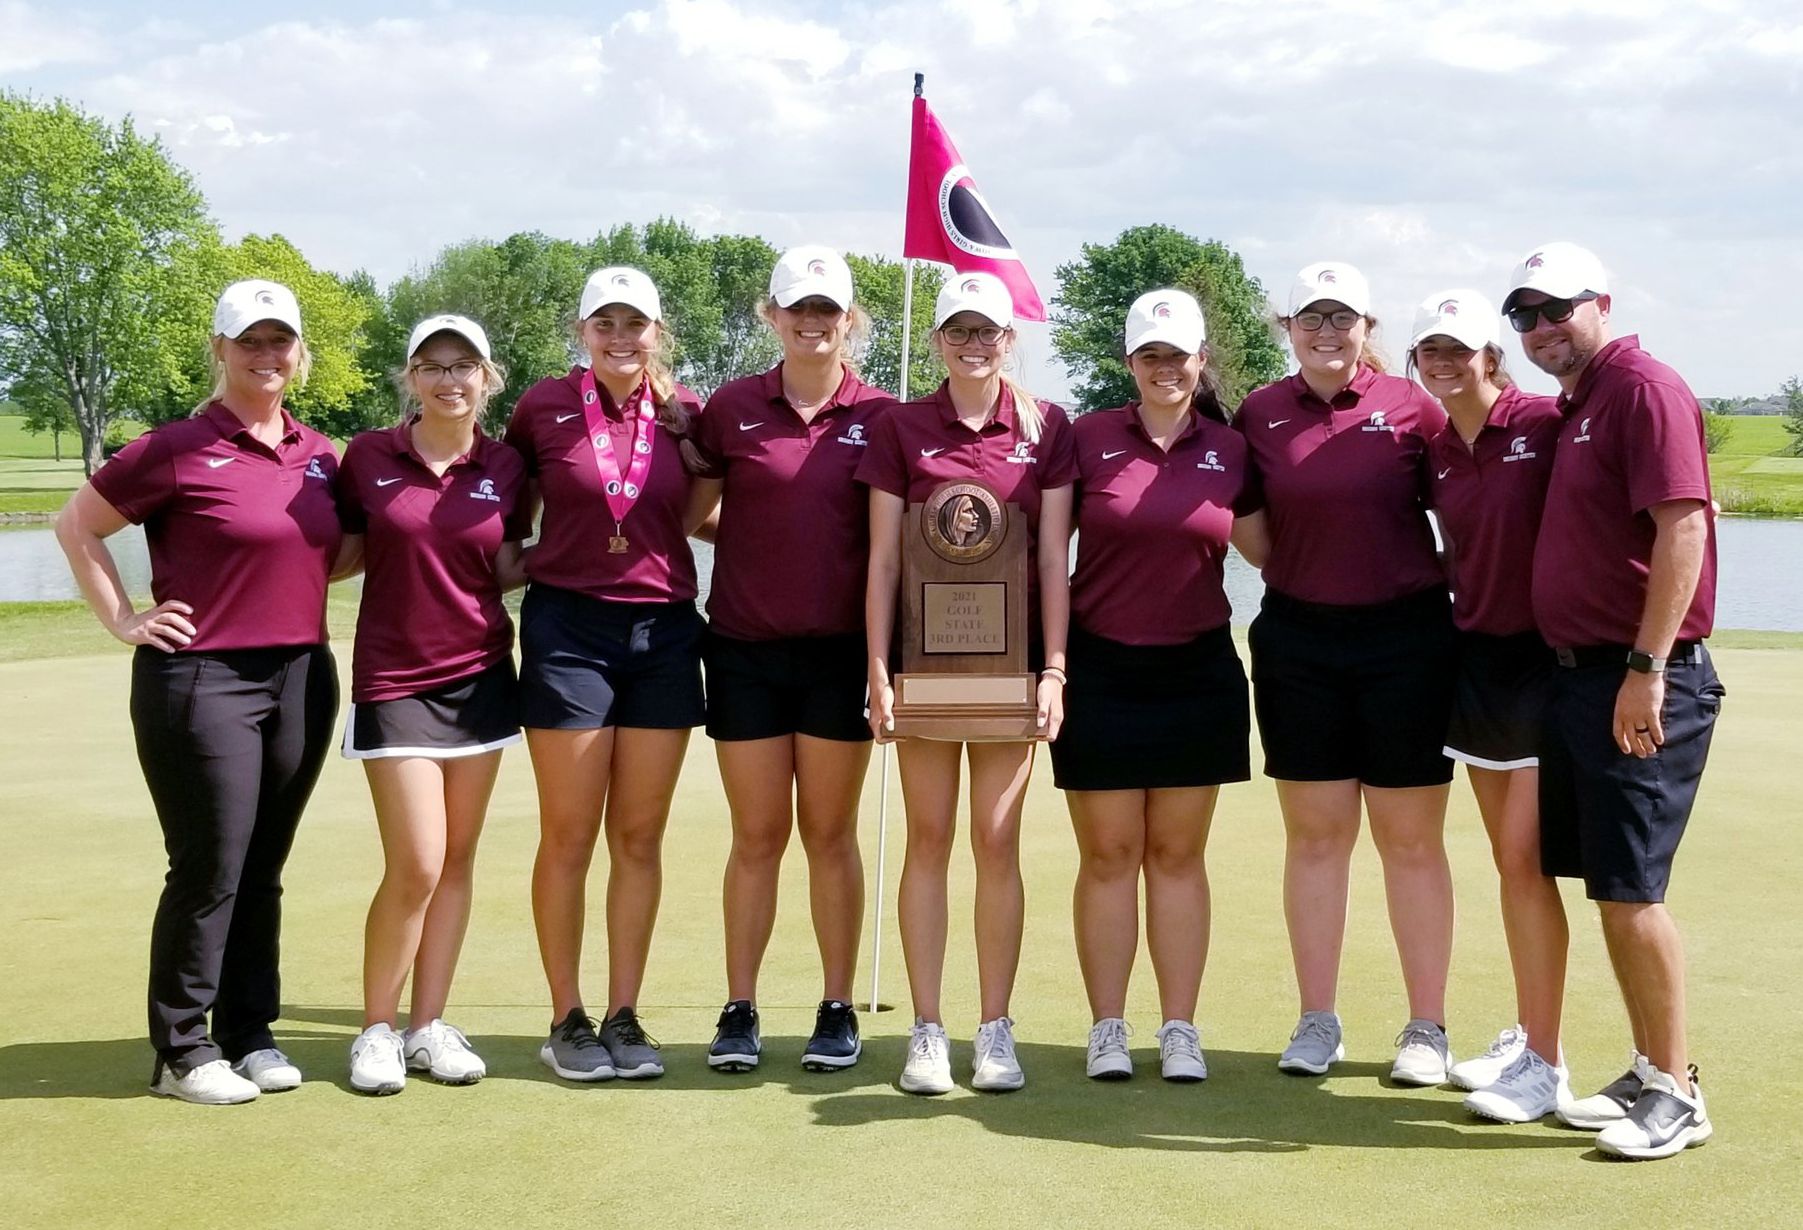 Grundy Center girls golf finished third at the Class 1A state meet in Ames in 2021. Holding the trophy is Lauren Krausman, the Spartans’ only senior on the team. Abbie Lindeman, third from left, was seventh overall as an individual. (Jake Ryder photo)